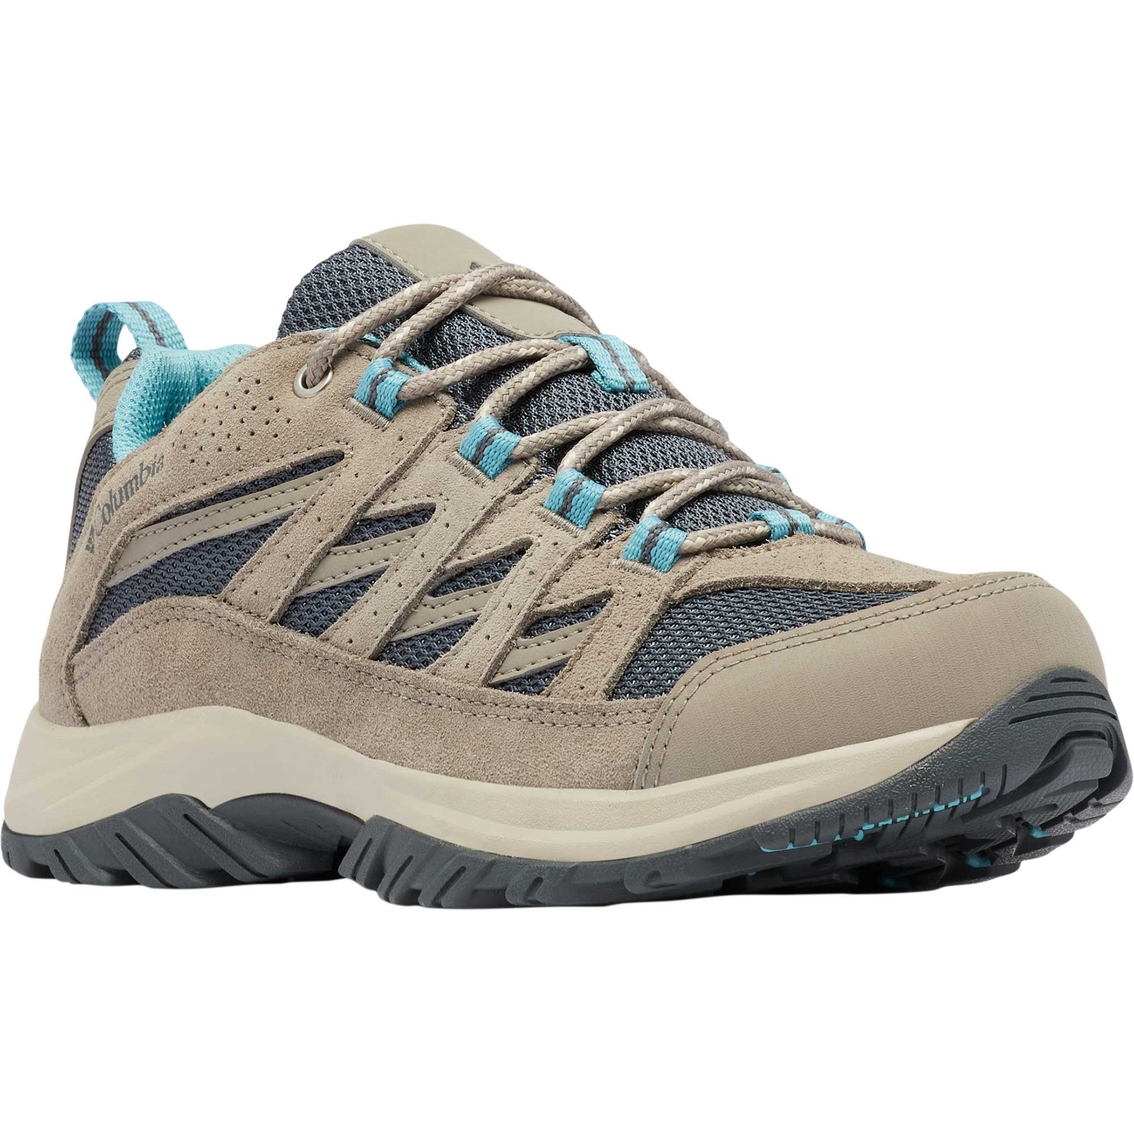 Columbia Women's Crestwood Hiking Boots | Boots | Shoes | Shop The Exchange